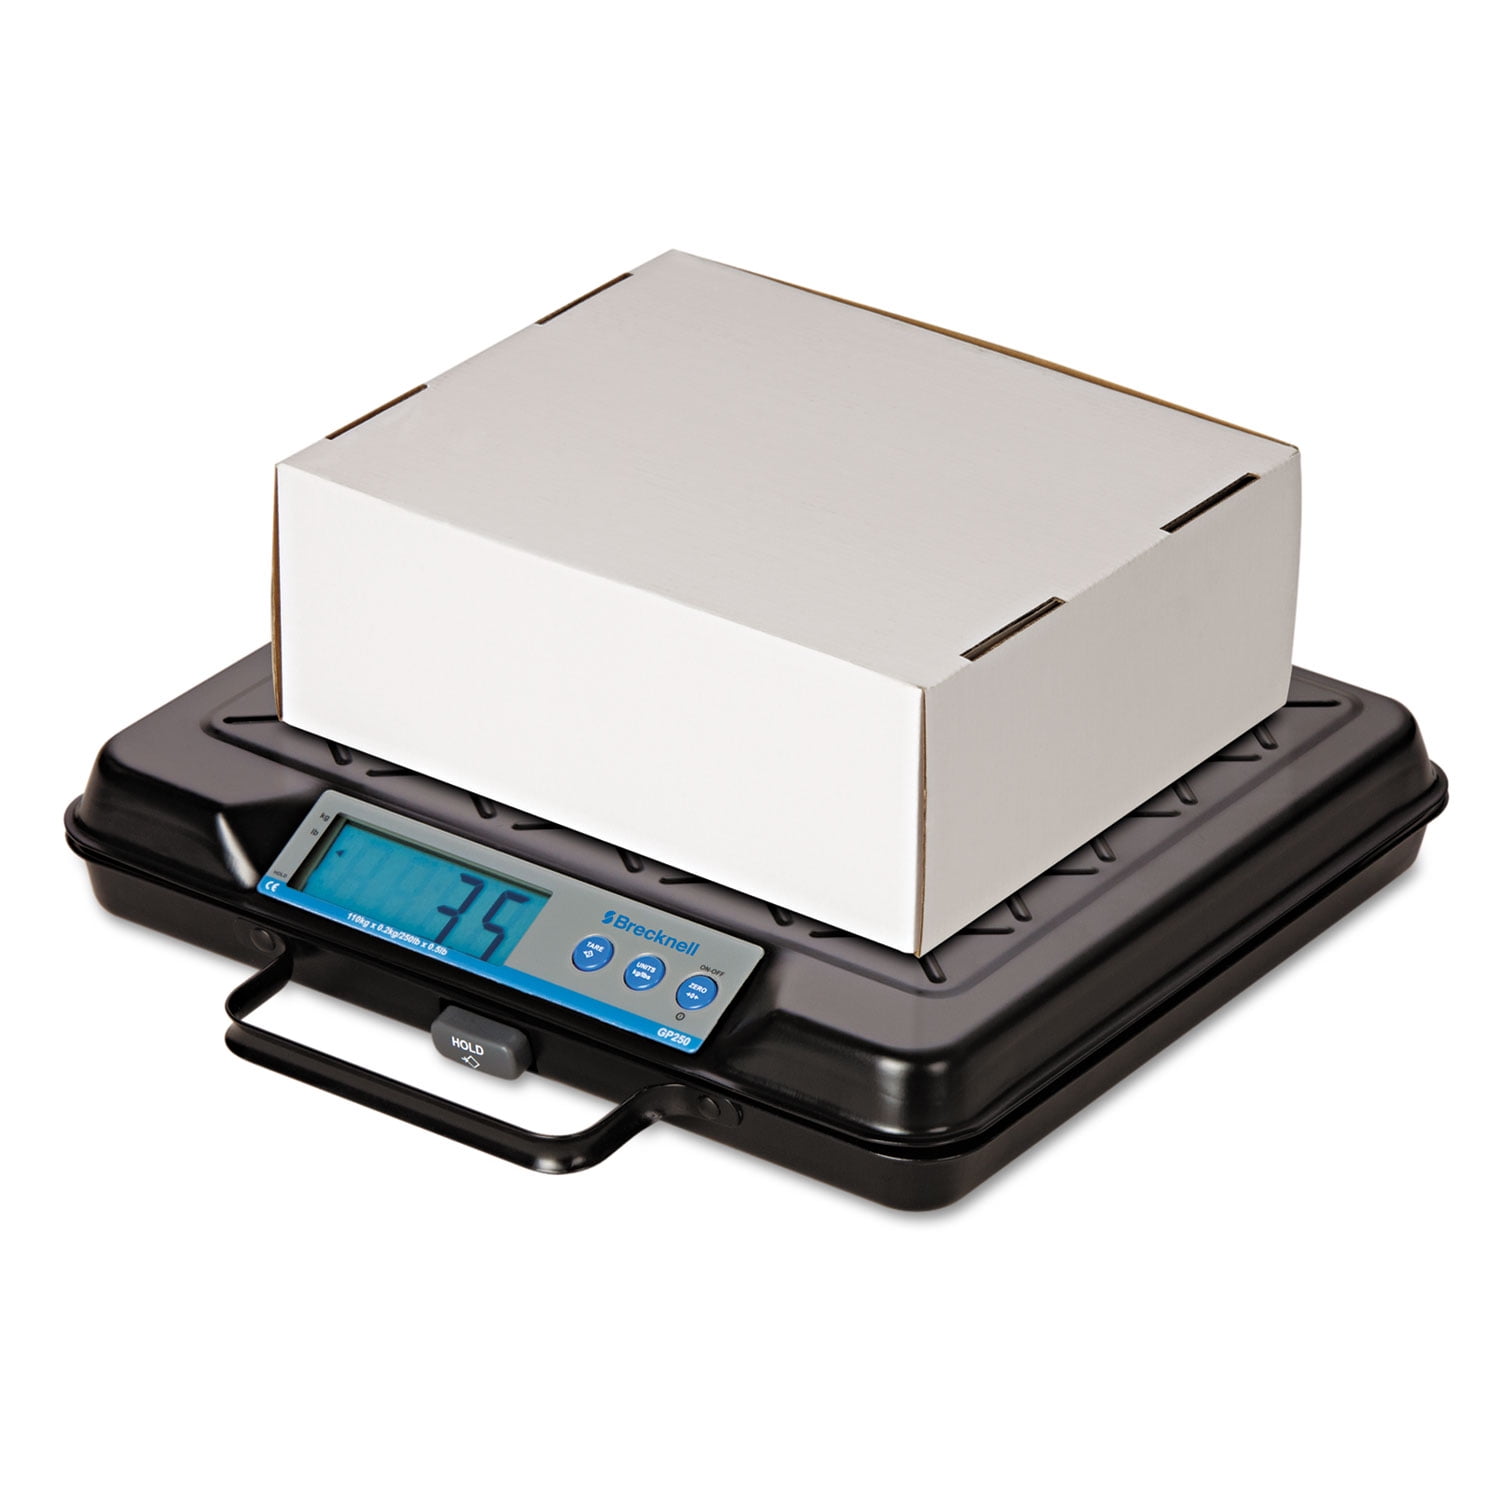 U.S. Solid Waterproof Bench Scale – 15 kg IP68 Water Repellent Compact Bench Balance, 15 kg x 1 G (33 lb x 0.002 lb)